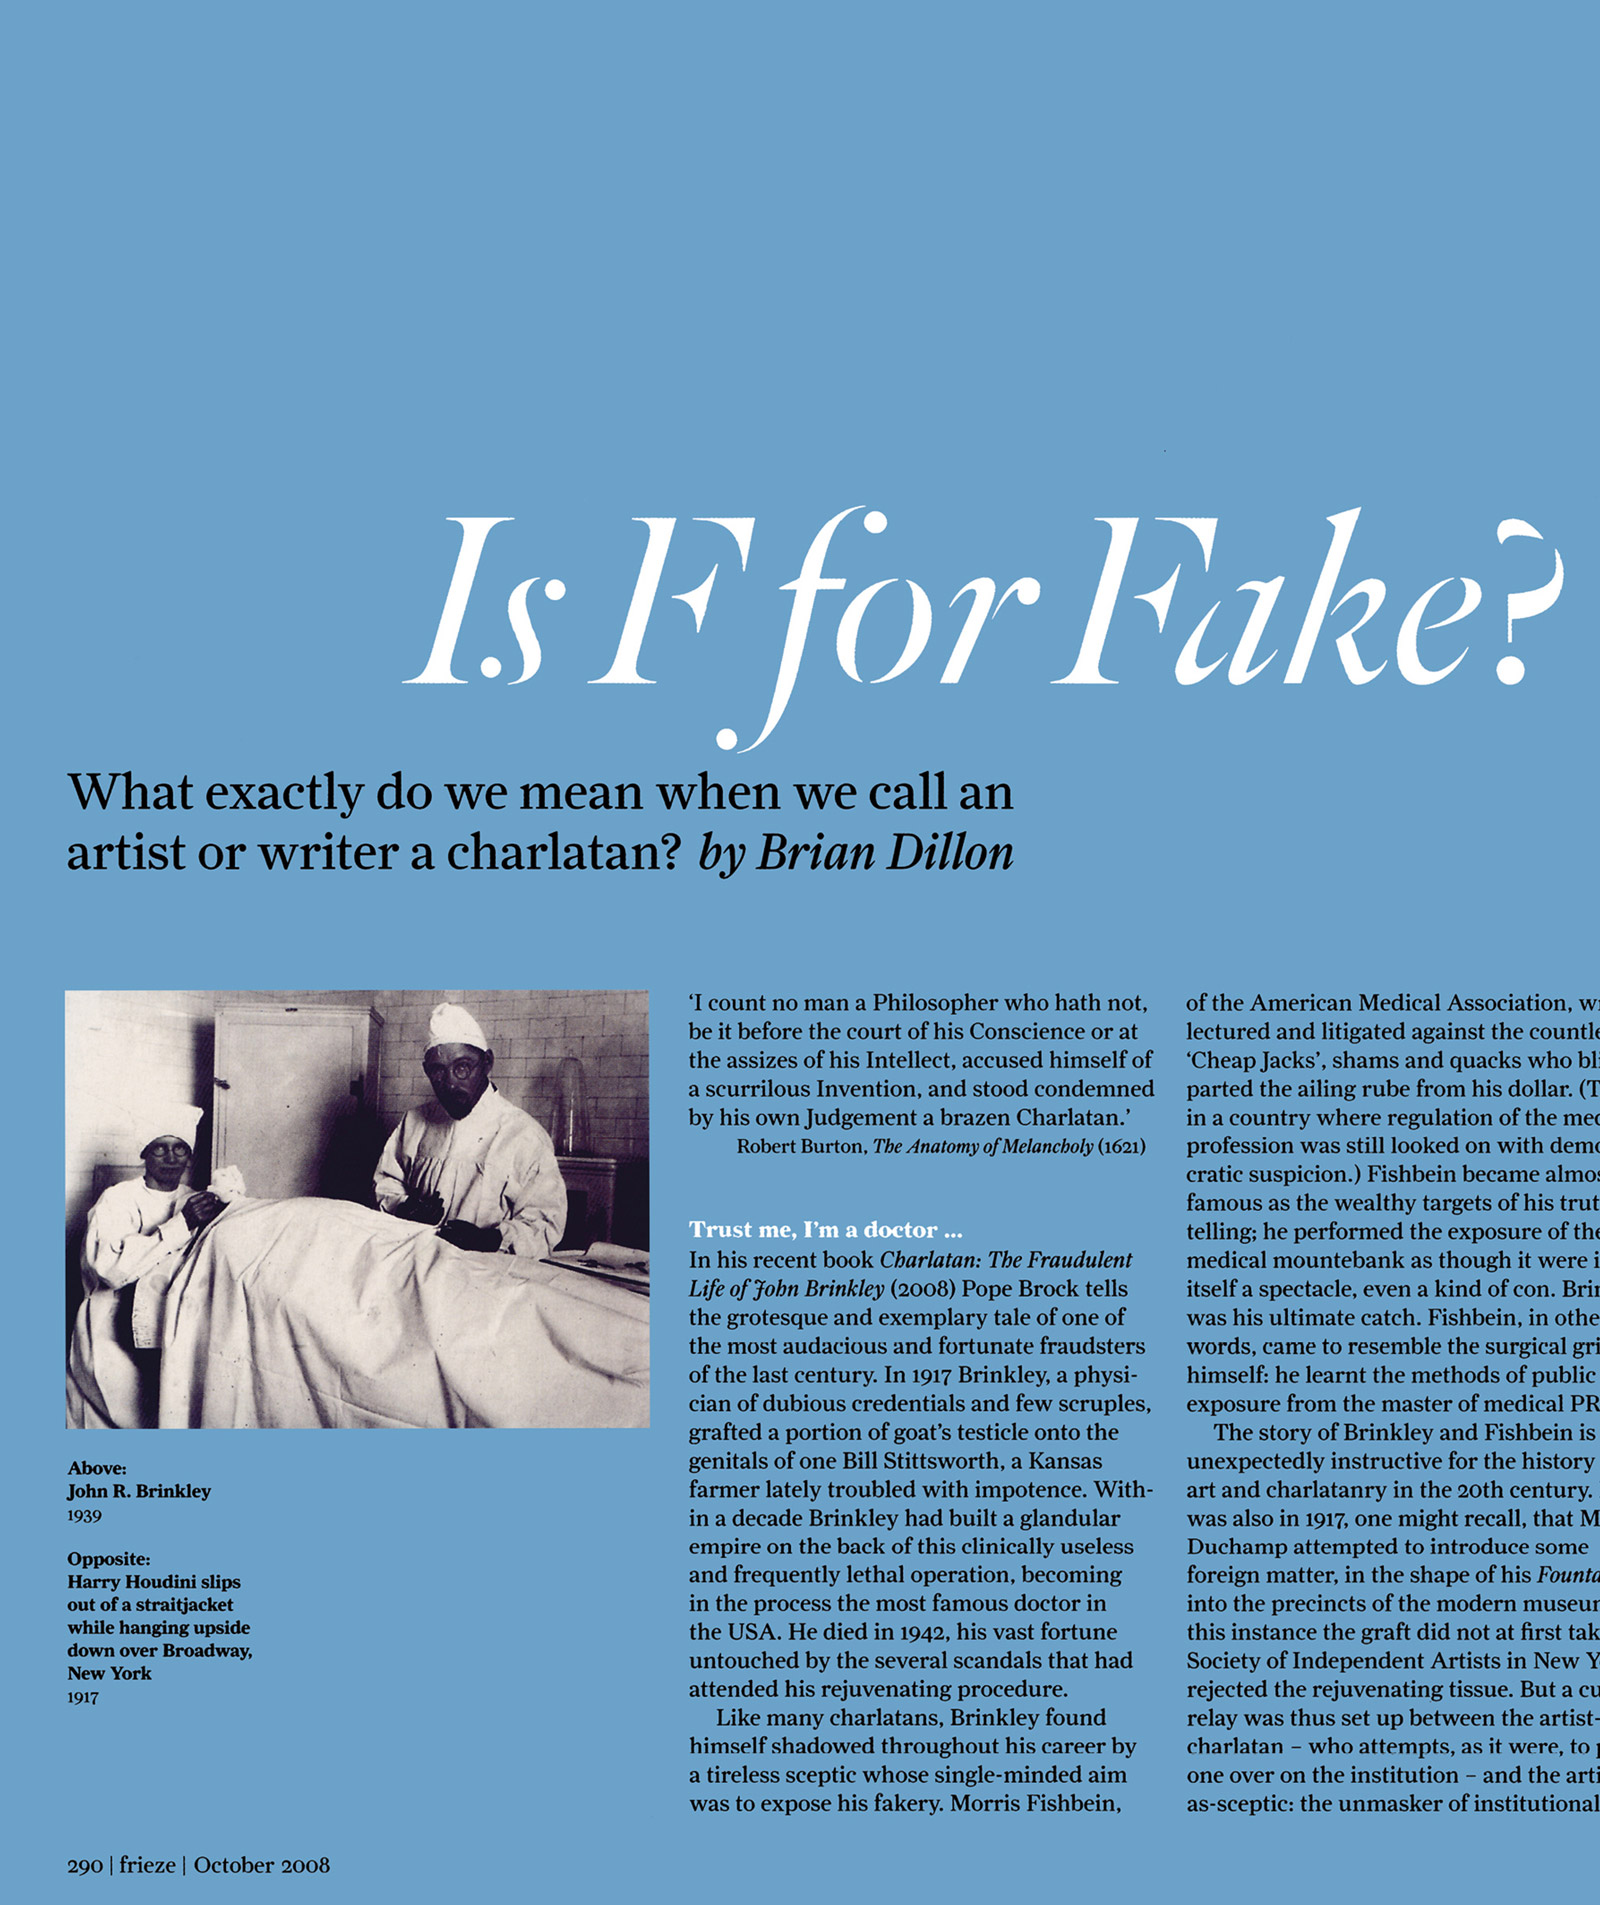 A scan of Brian Dillon’s article titled “Is F for Fake?” in the October 2008 issue of Frieze magazine.